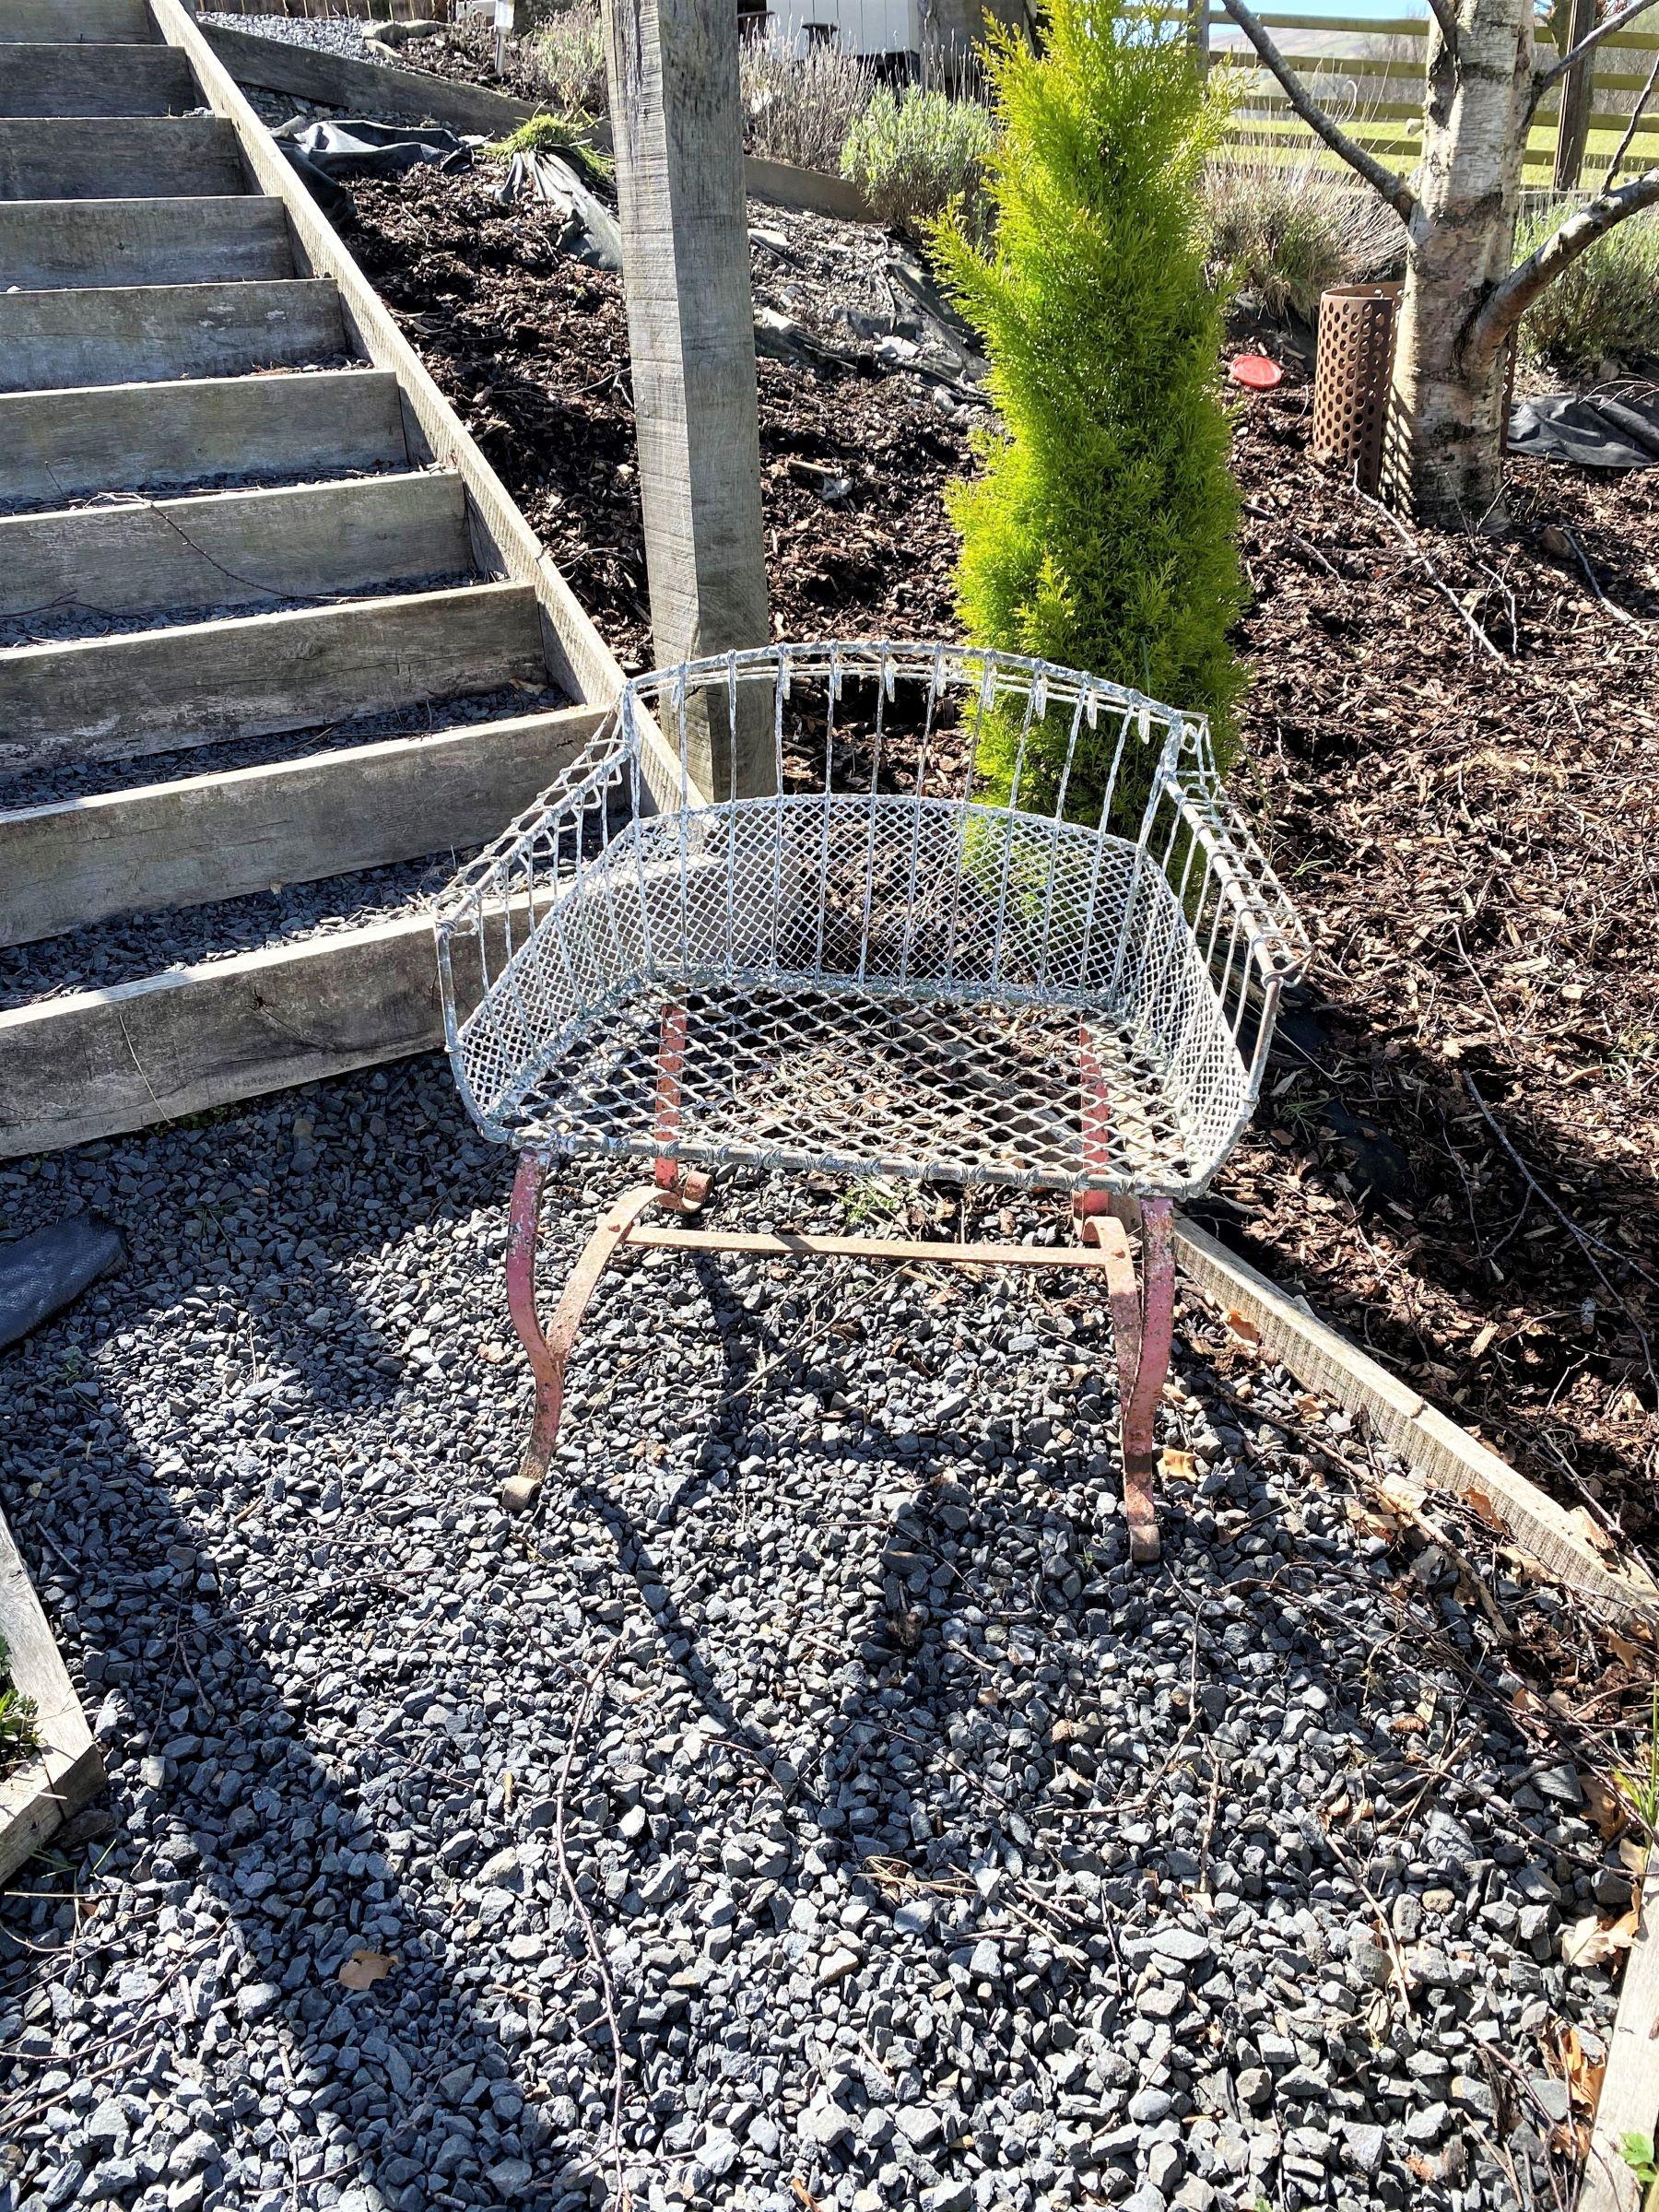 A beautiful petite Garden Seat with intricate wirework detail, sitting on rivetted wrought iron scrolled feet. These early 20th Century examples are rare to find in such lovely condition, this particular chair has an unusual shape with low back and